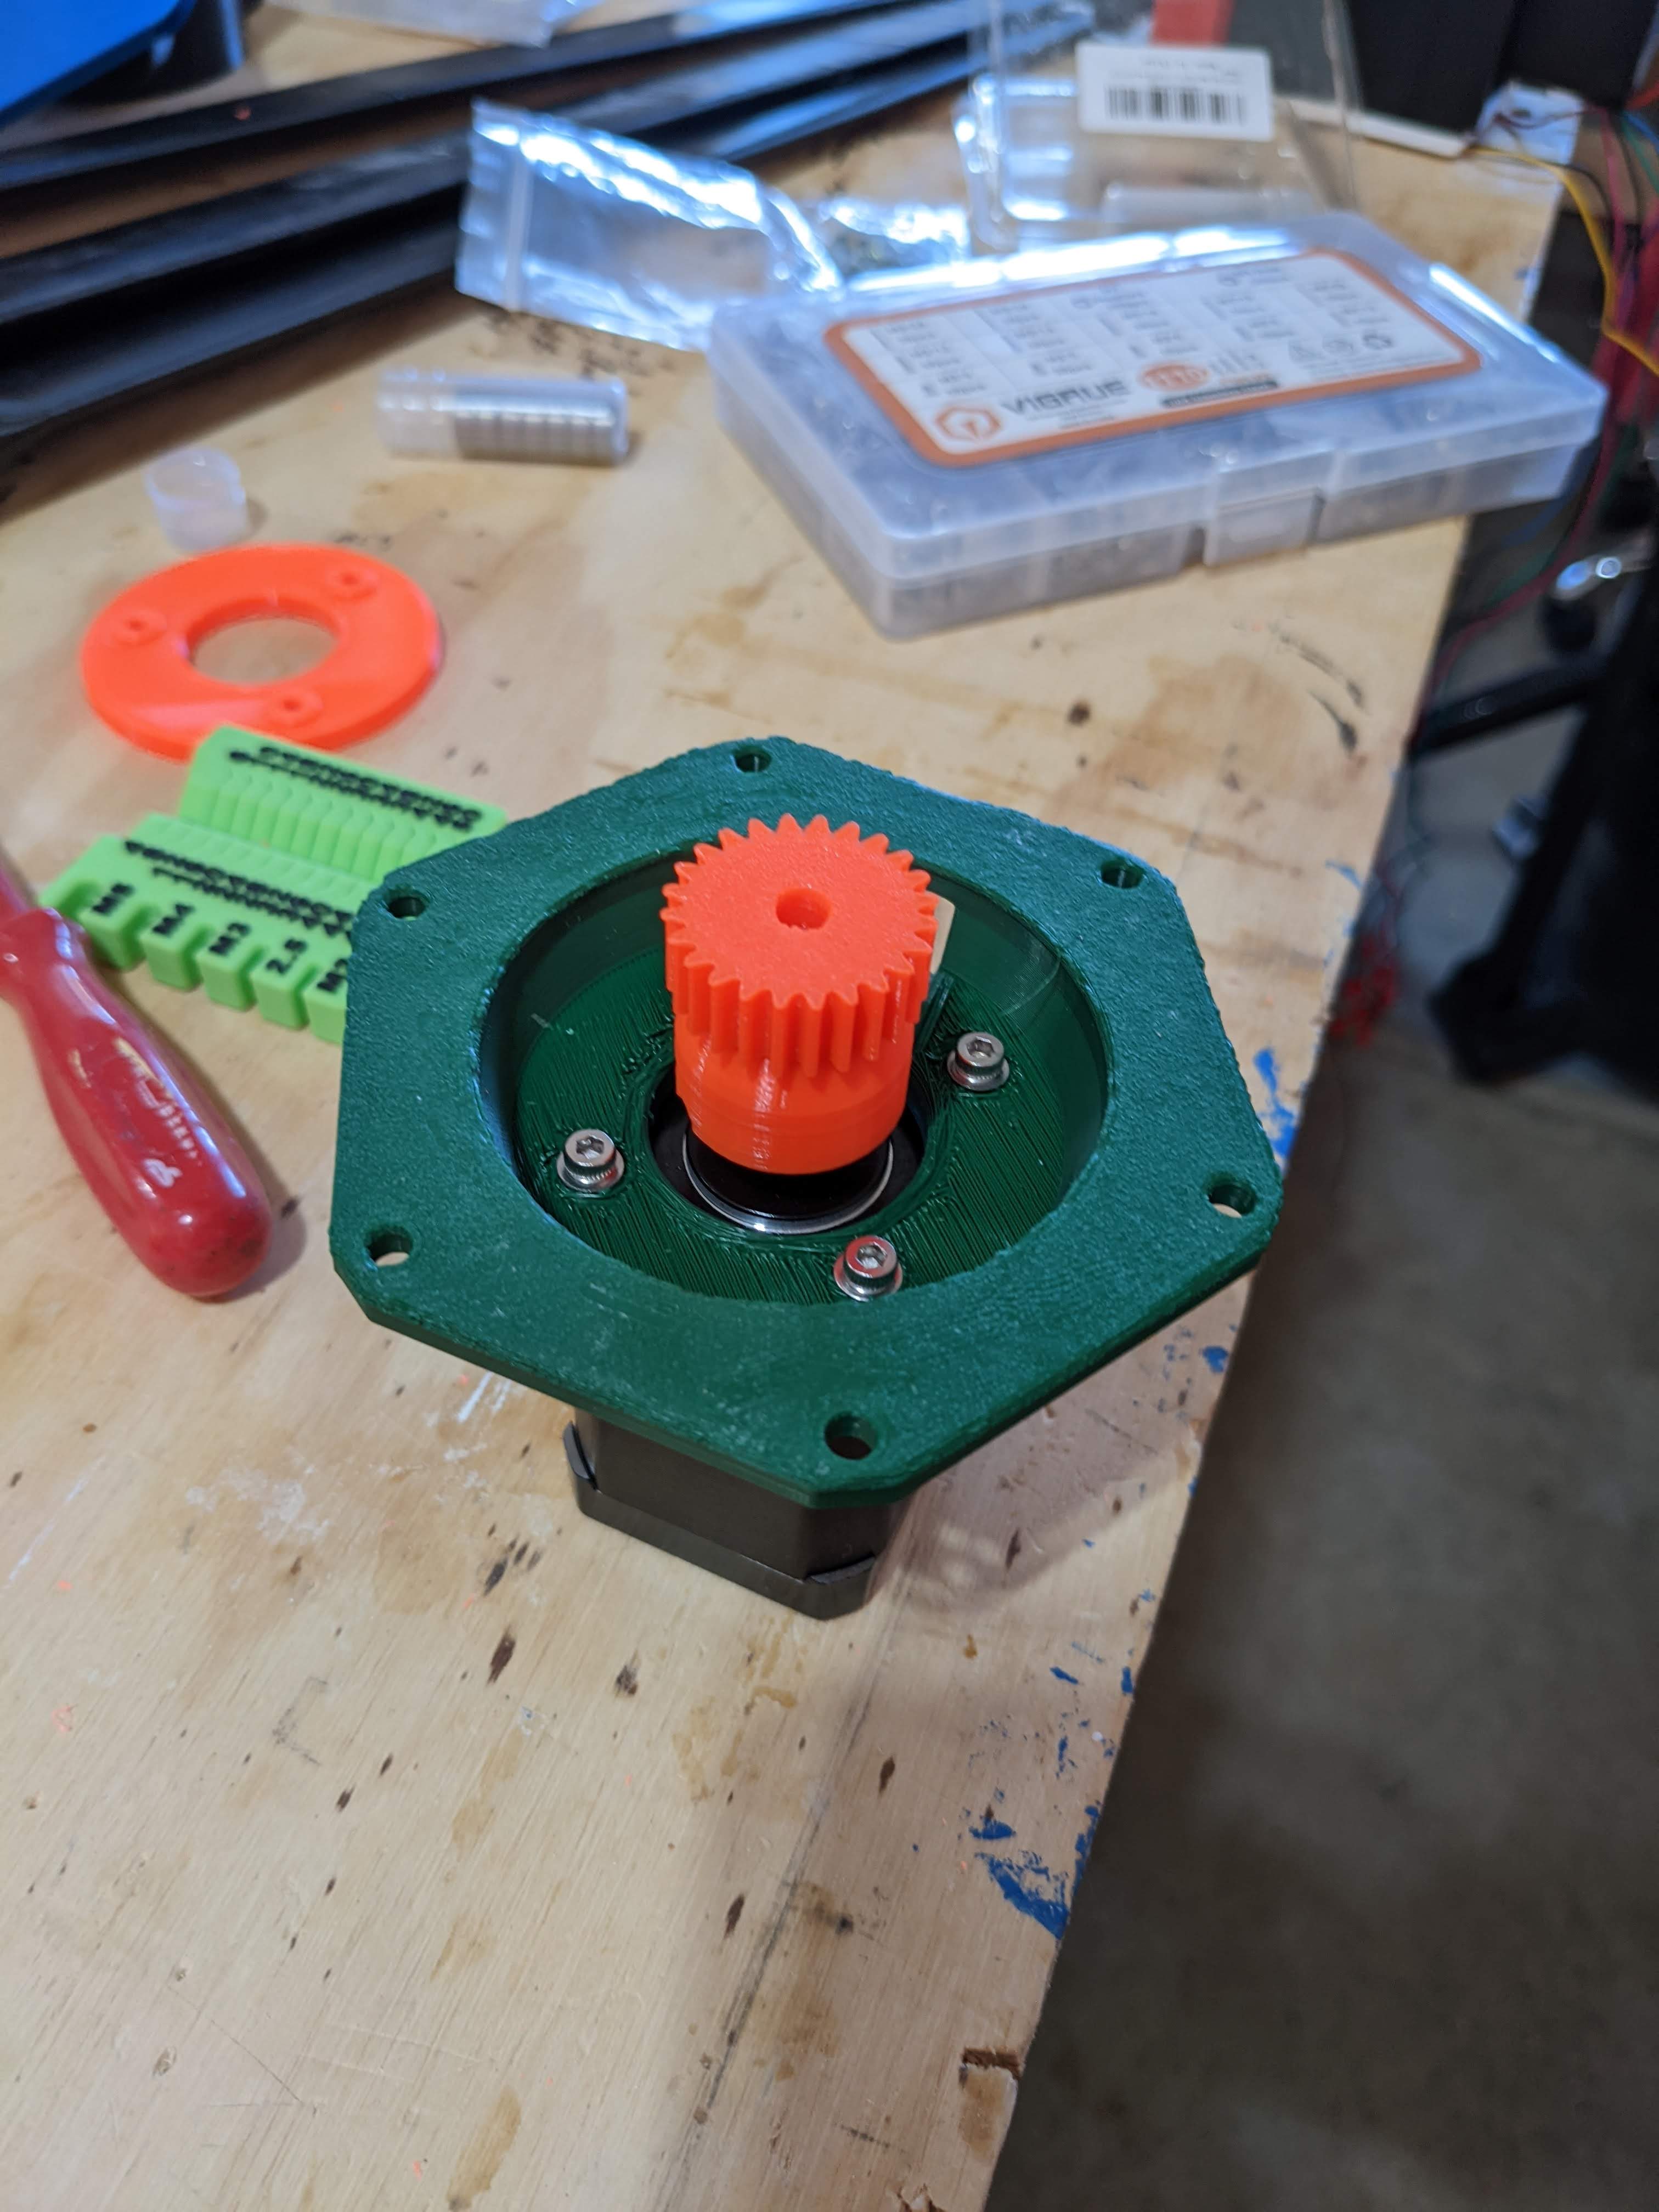 Nema 17 adapter for Planetary Gearbox from Youtuber "Let's print"